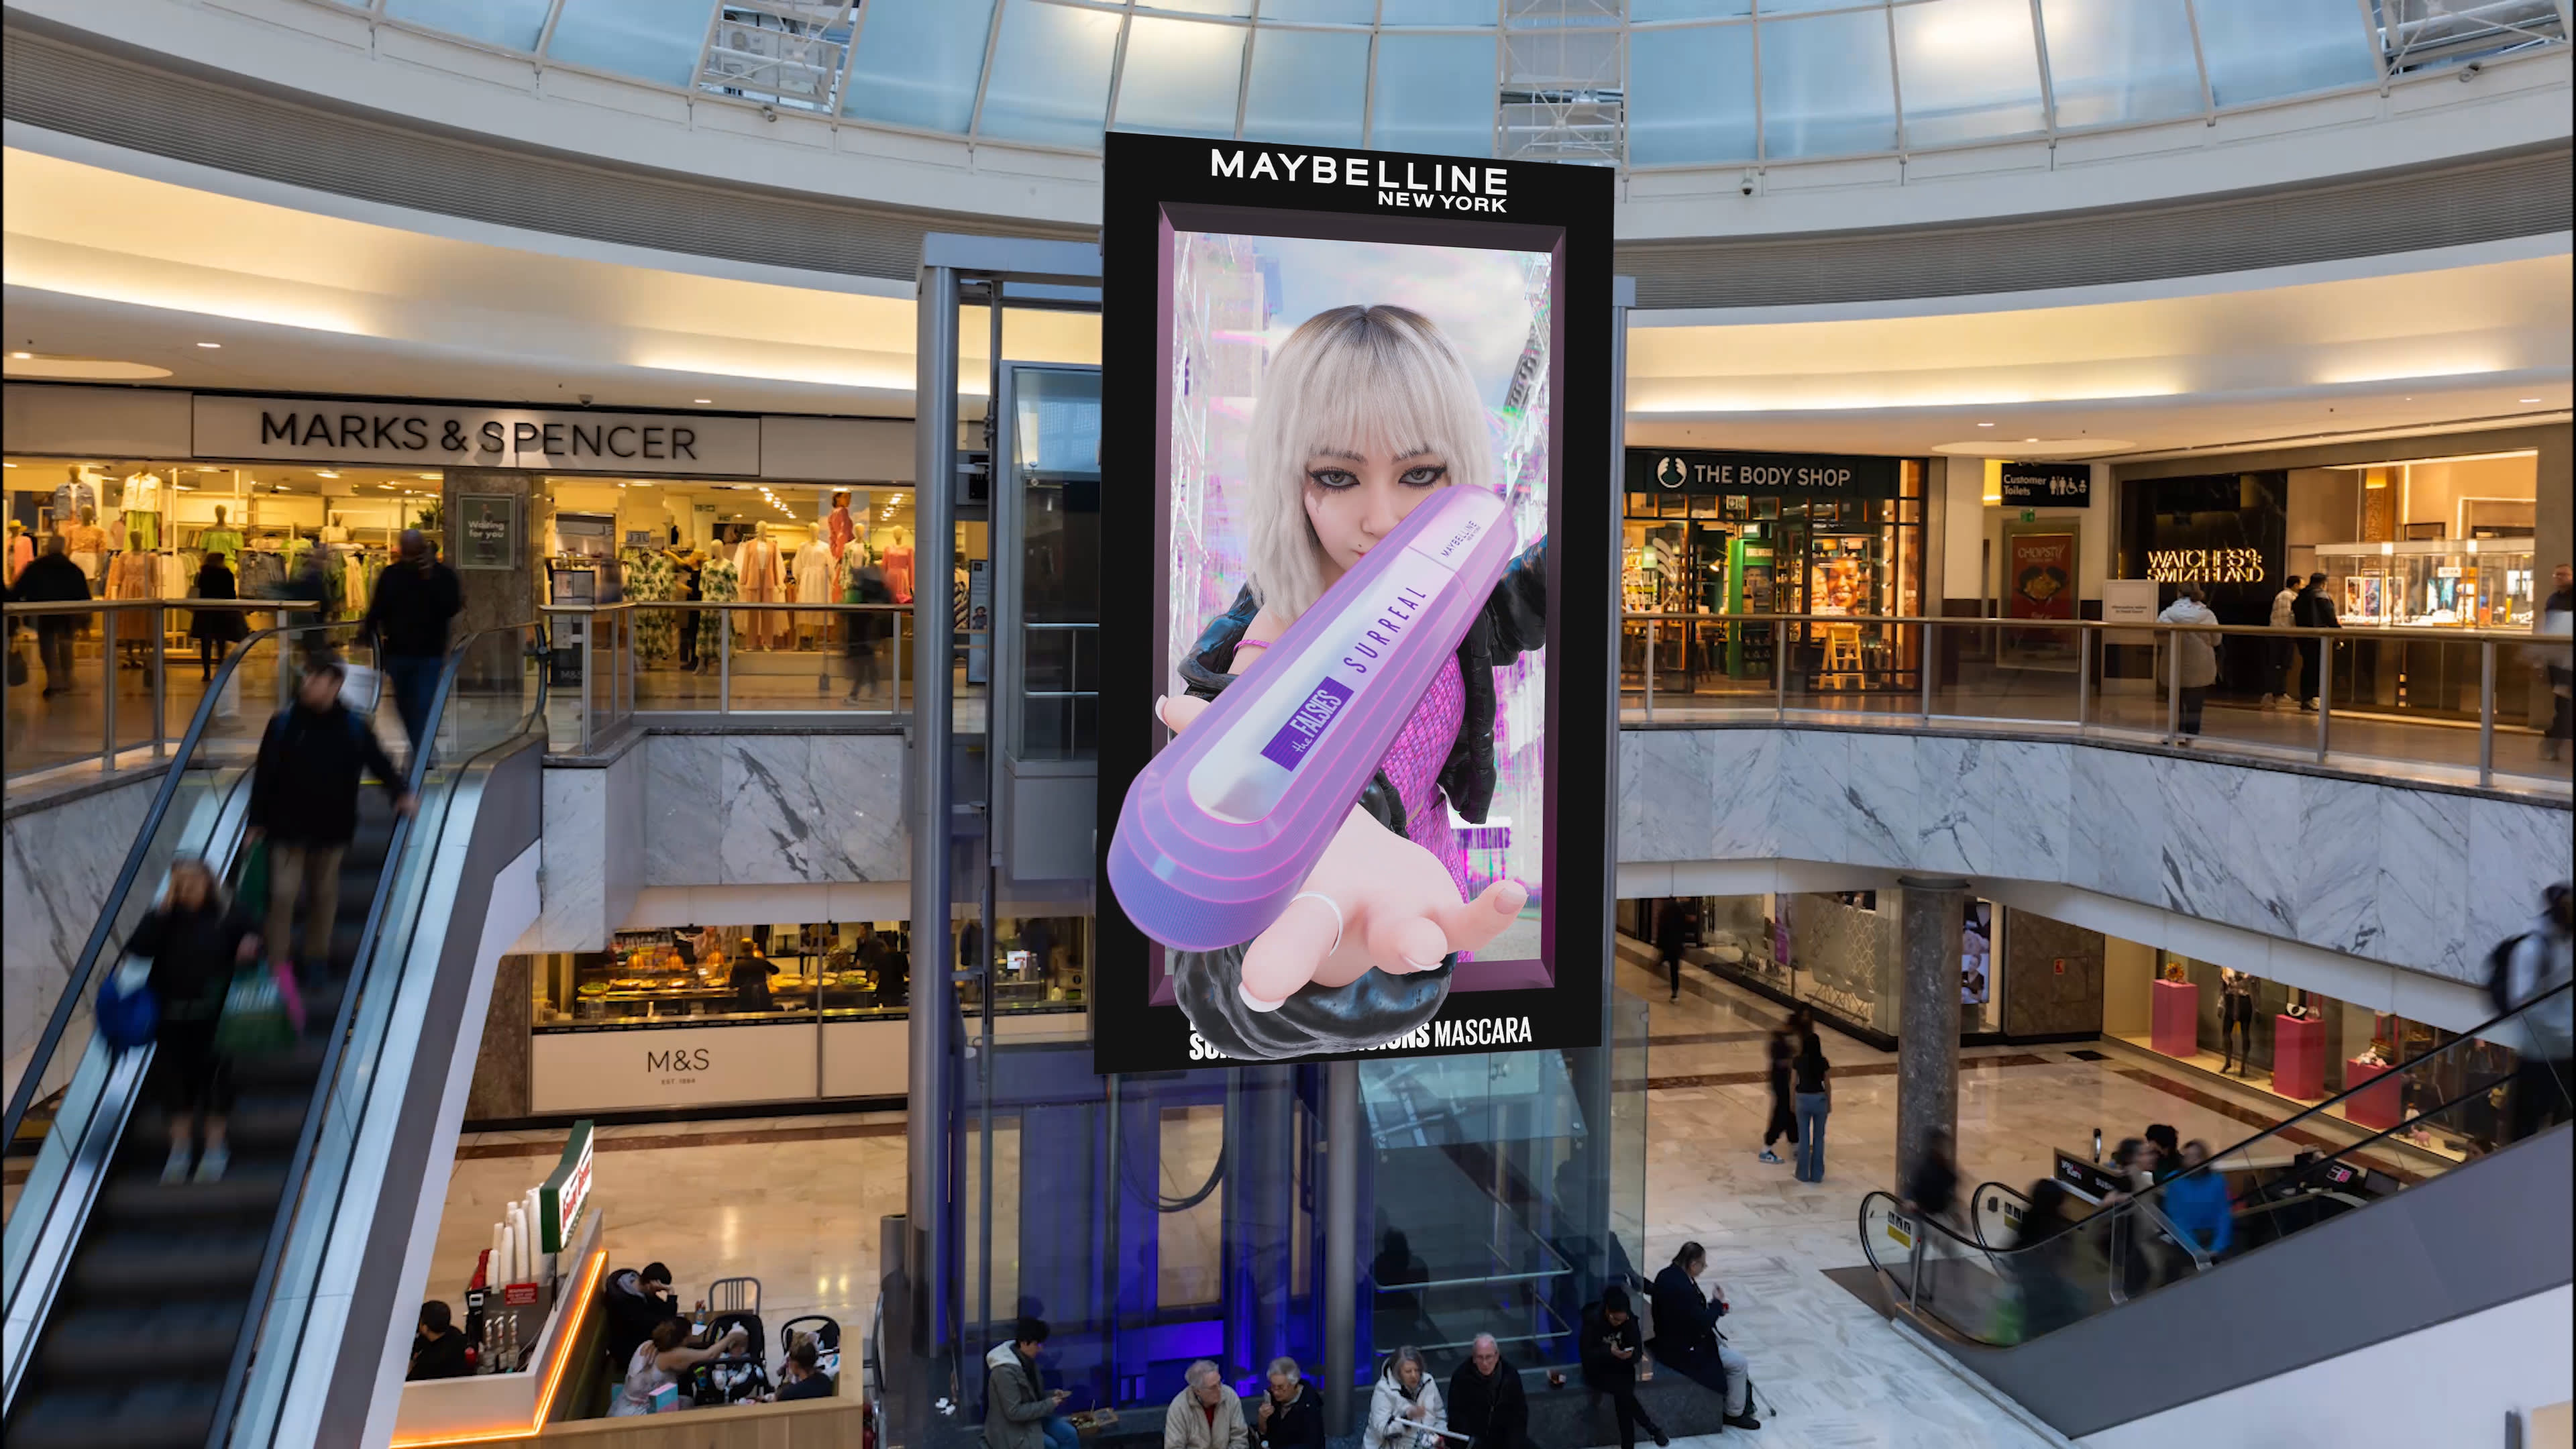 Maybelline's 3D digital shopping center campaign